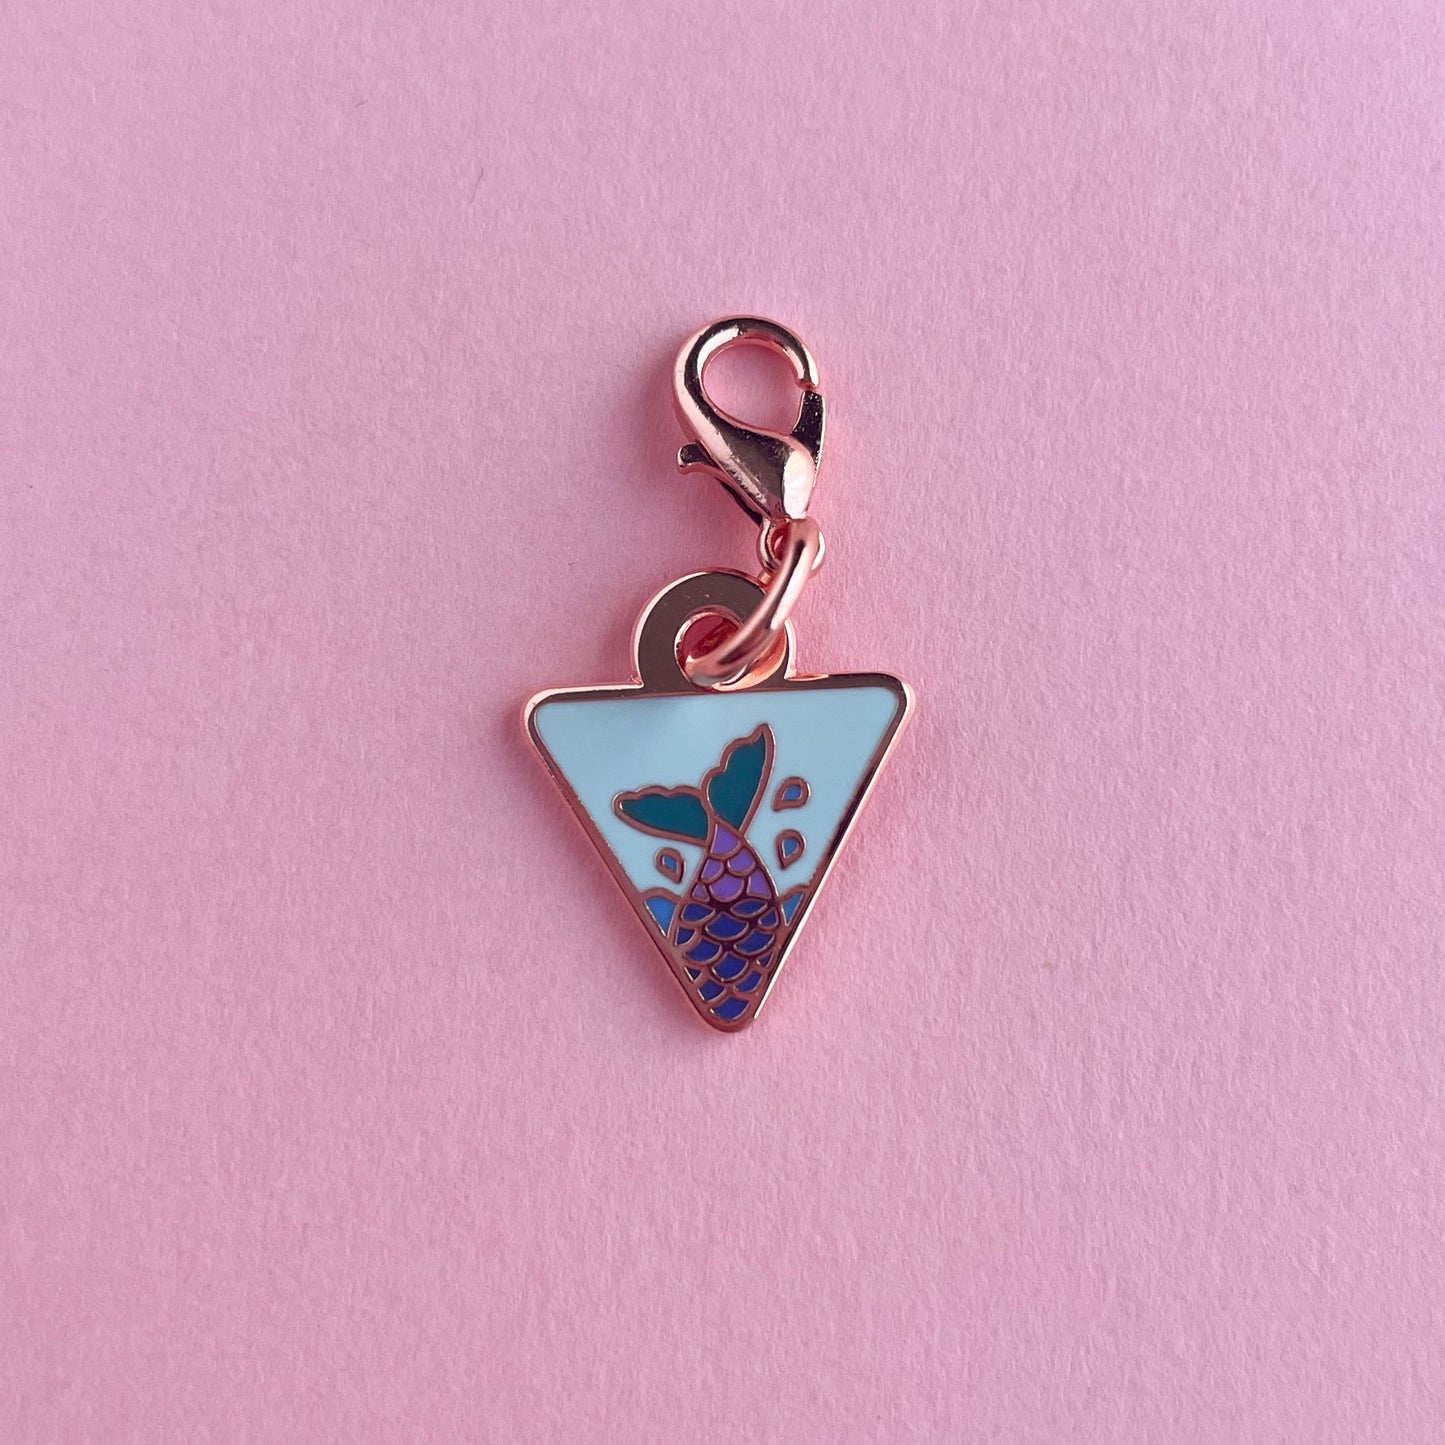 An upside down triangle charm with a lavender mermaid tail on it. The charm is on a pink background.